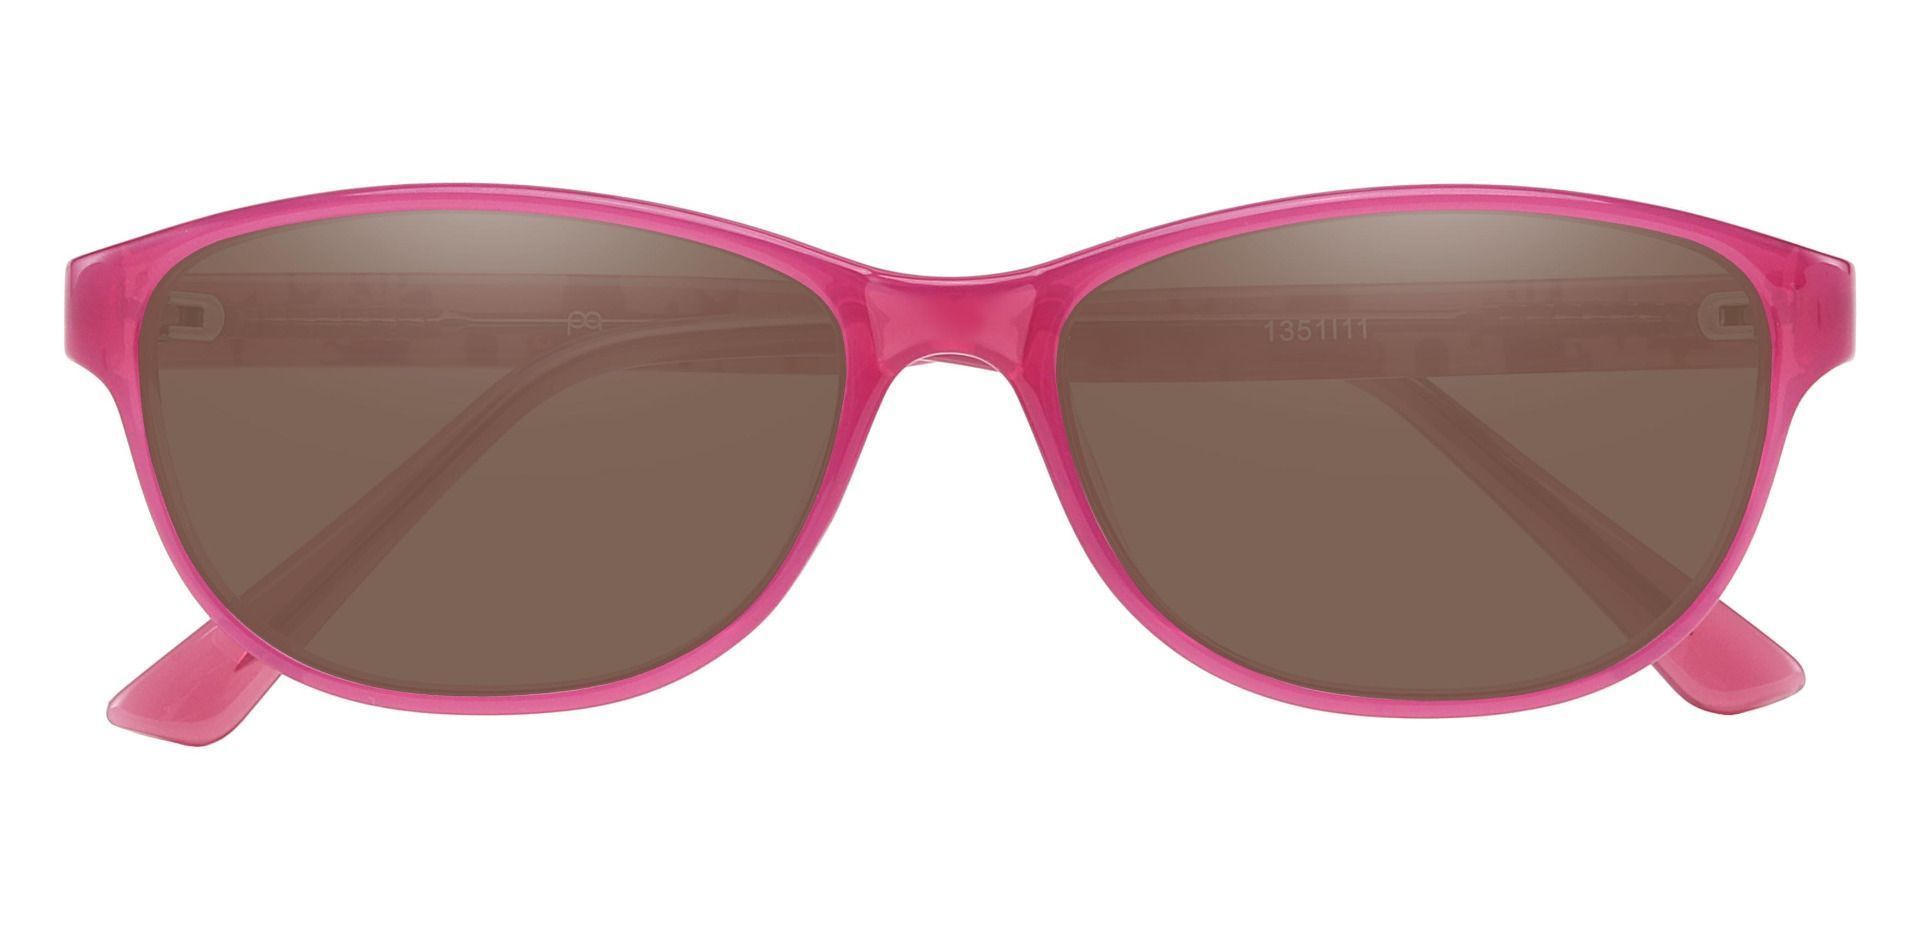 Patsy Oval Non-Rx Sunglasses - Pink Frame With Brown Lenses